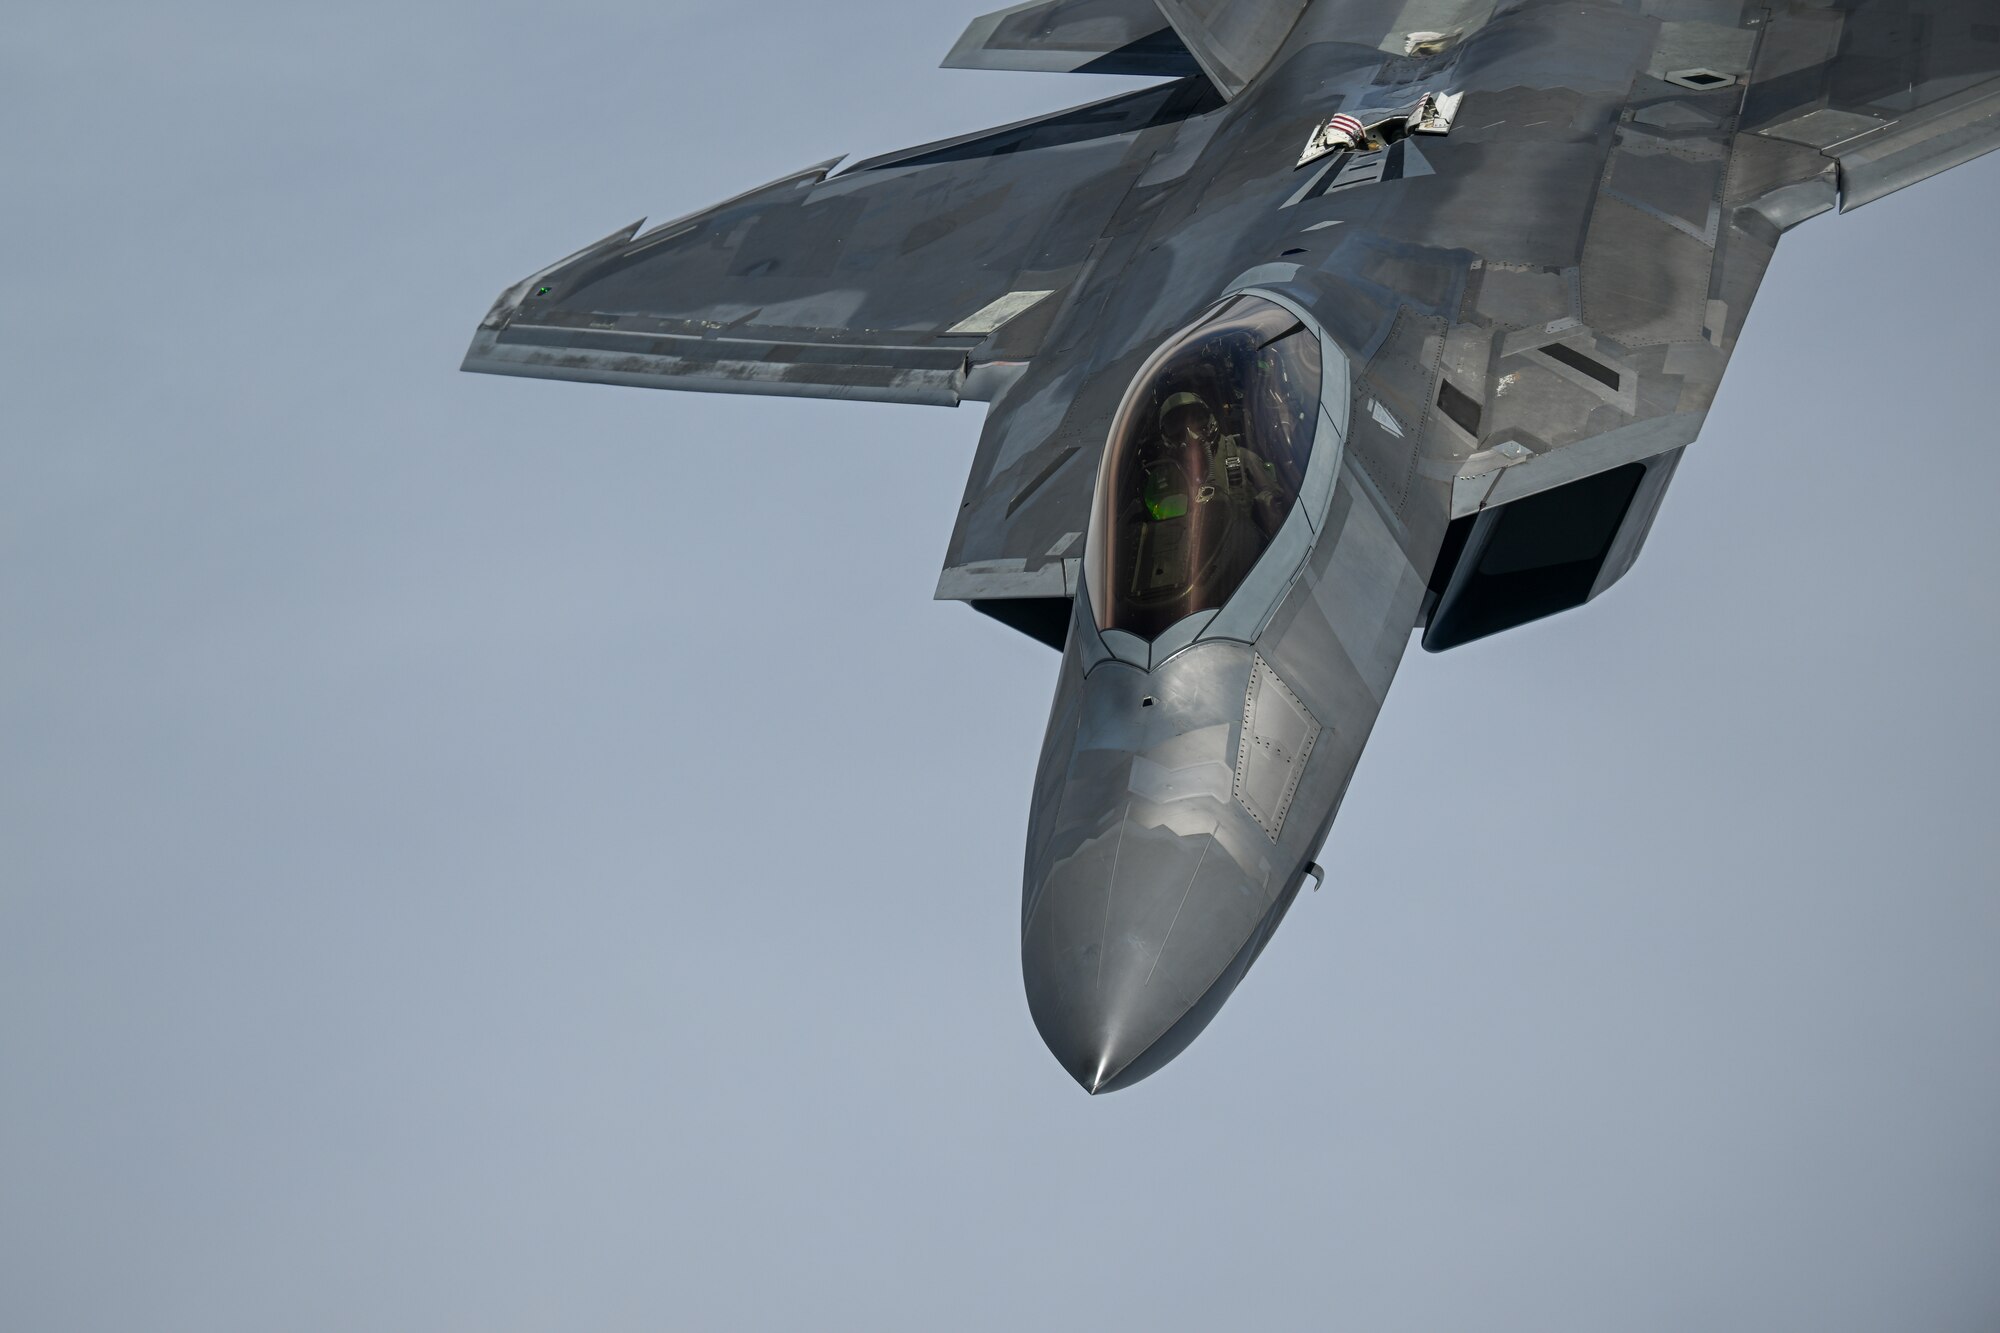 A U.S. Air Force F-22 Raptor, deployed to Kadena Air Base, Japan, approaches a KC-135 Stratotanker assigned to the 909th Air Refueling Squadron, Kadena AB, for aerial refueling, June 10, 2022. Kadena Air Base regularly hosts visiting joint, allied and partner forces to conduct missions to enhance our operational readiness to defend Japan and ensure a free-and-open Indo-Pacific. (U.S. Air Force photo by Tech. Sgt. Corban Lundborg)